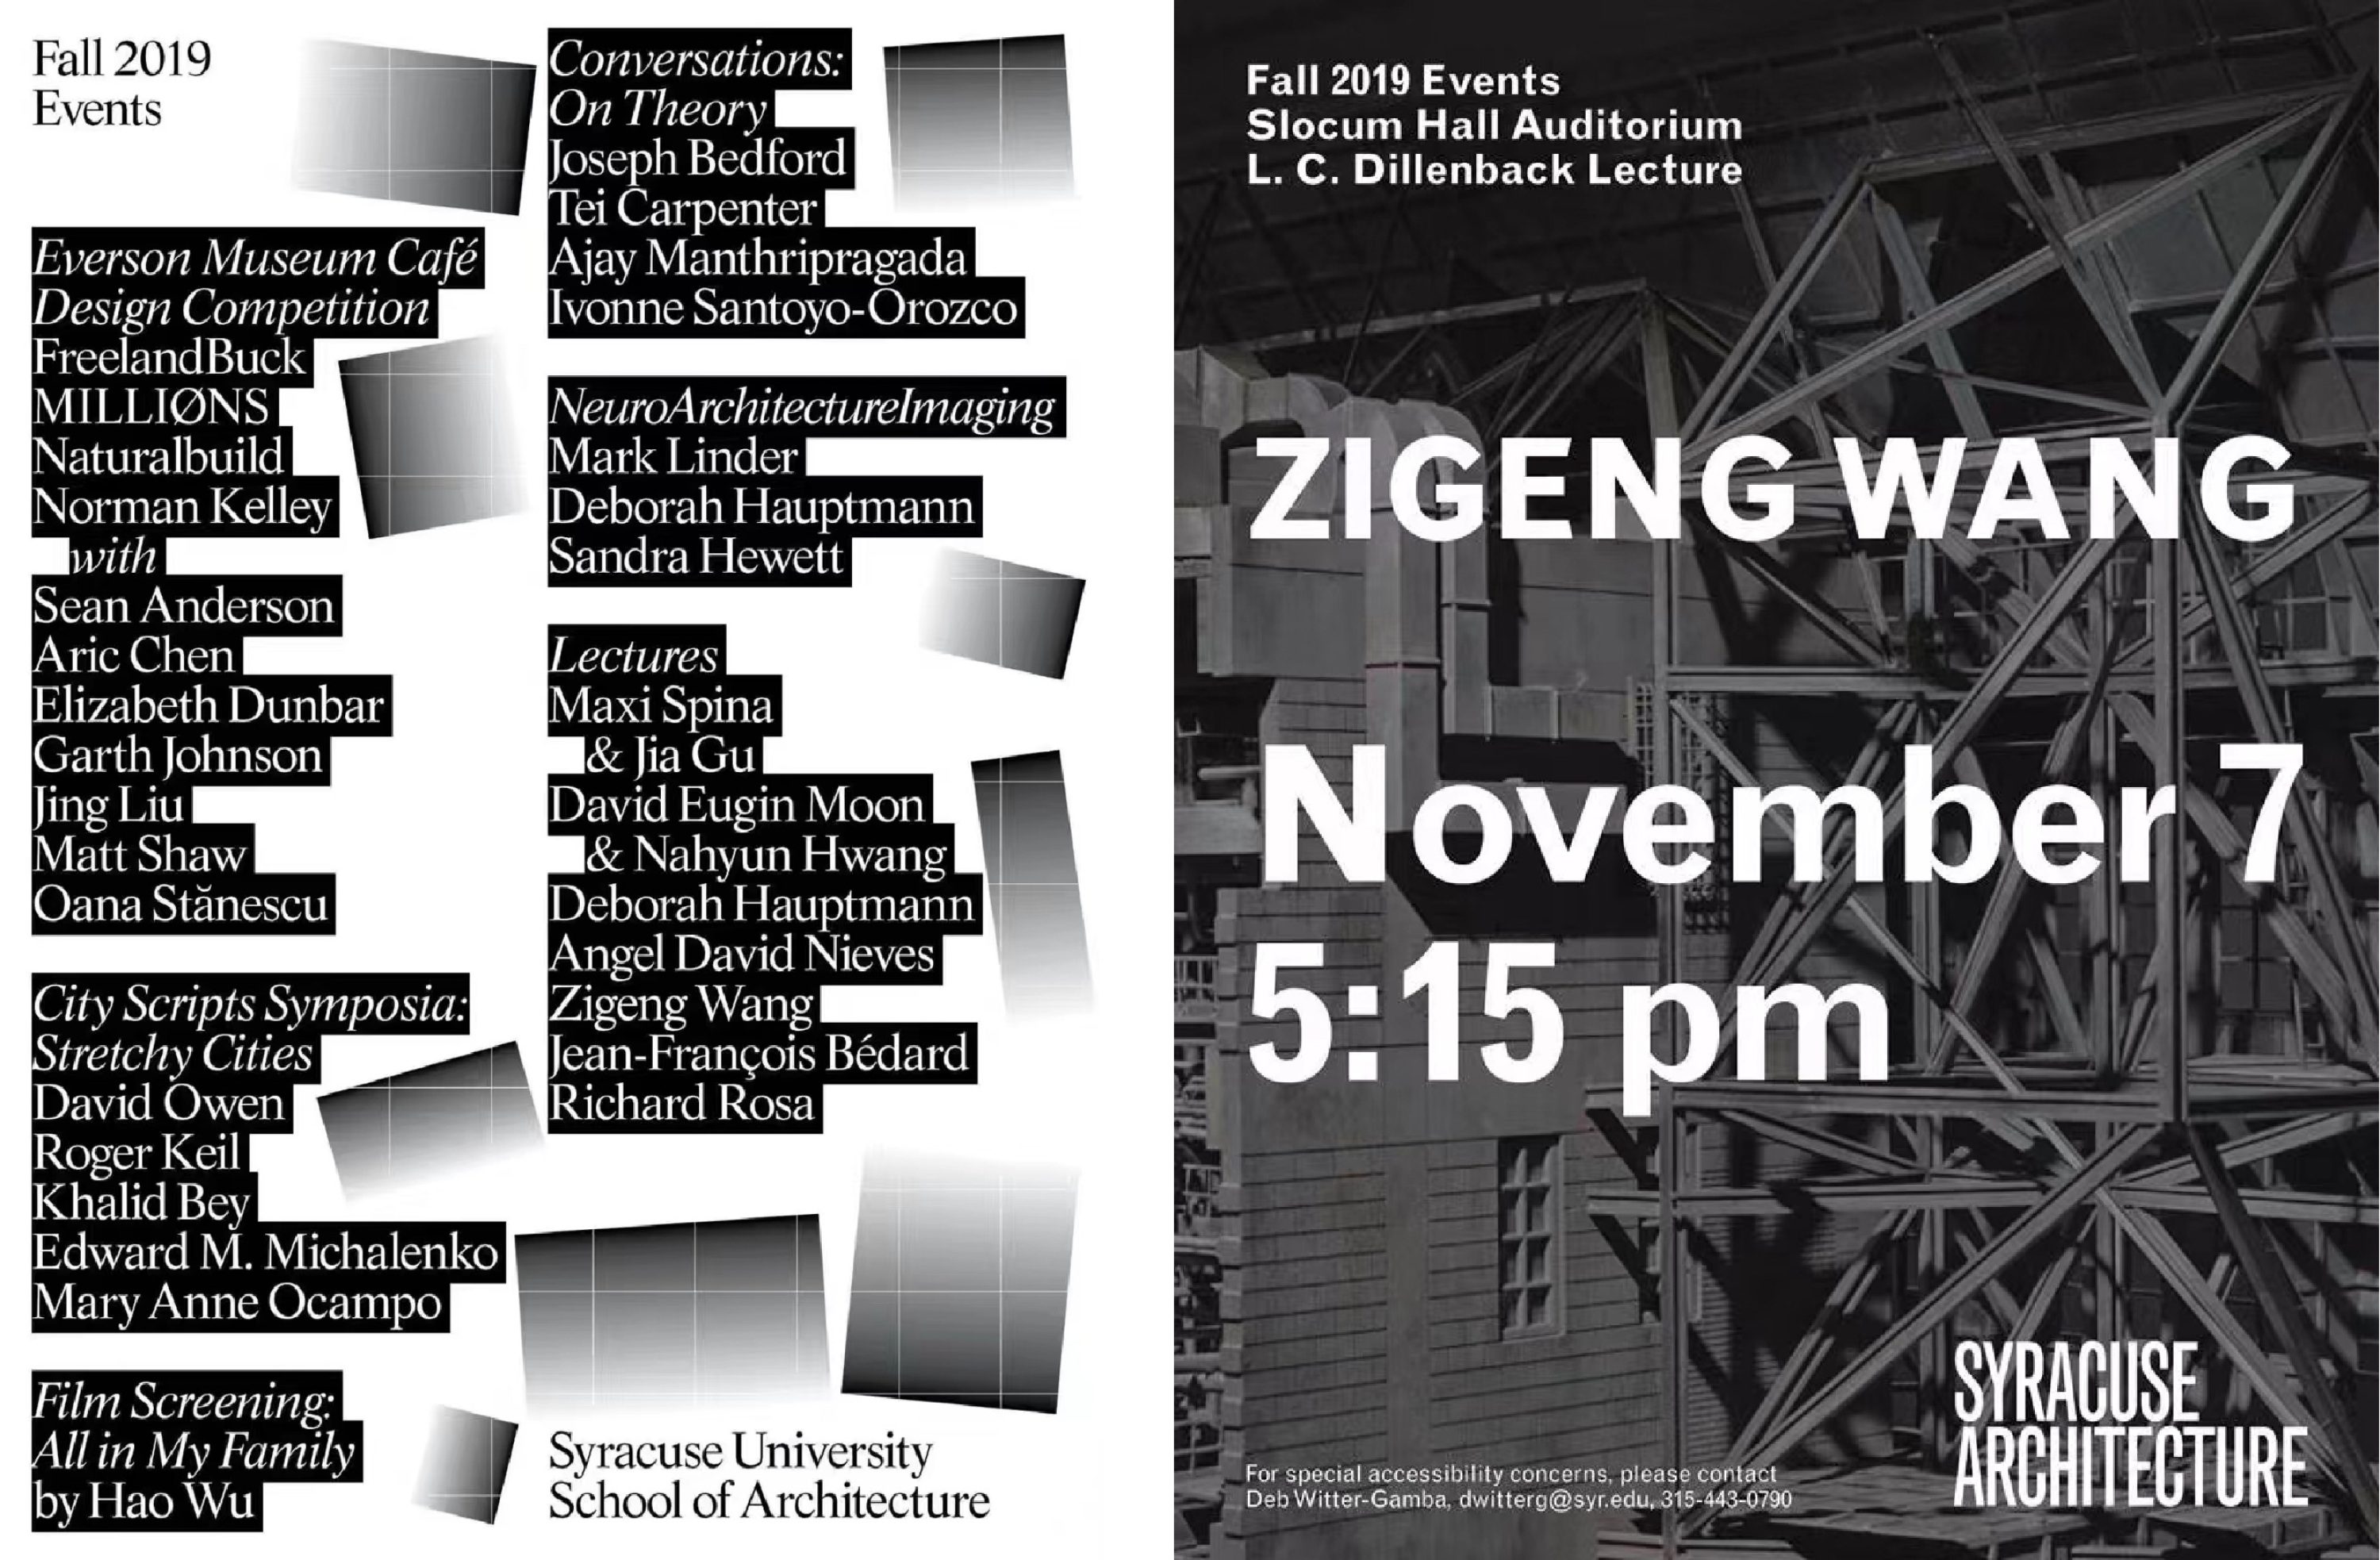 Zigeng Wang was invited to be a distinguished lecturer in the Syracuse University School of Architecture's 2019 Fall Lecture Series